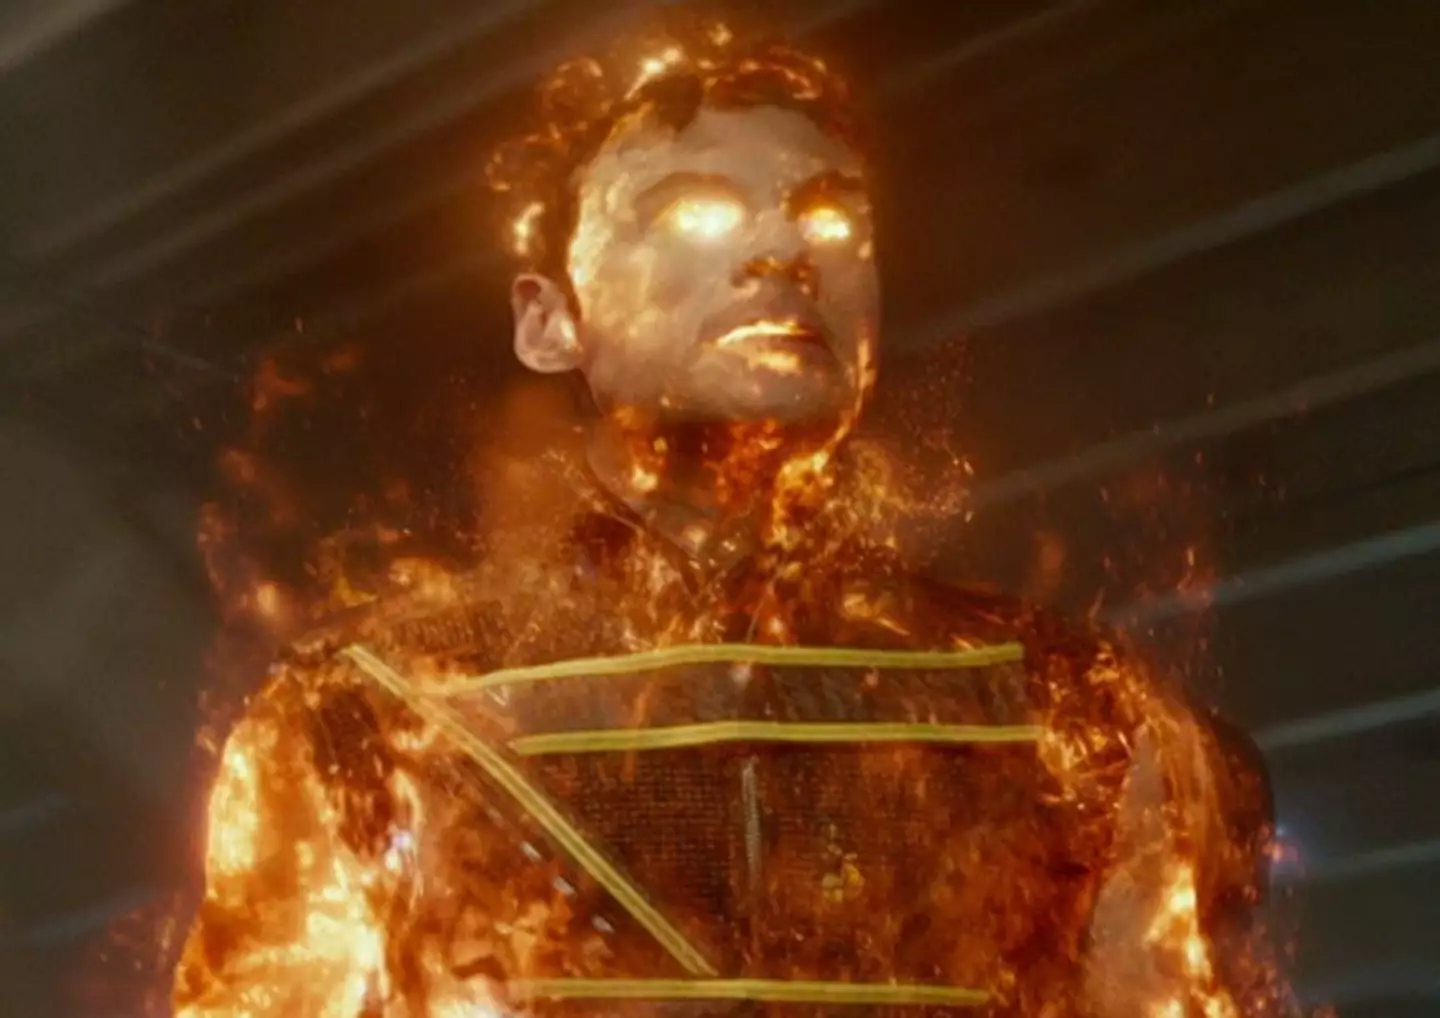 Canto played Sunspot in X-Men: Days of Future Past.